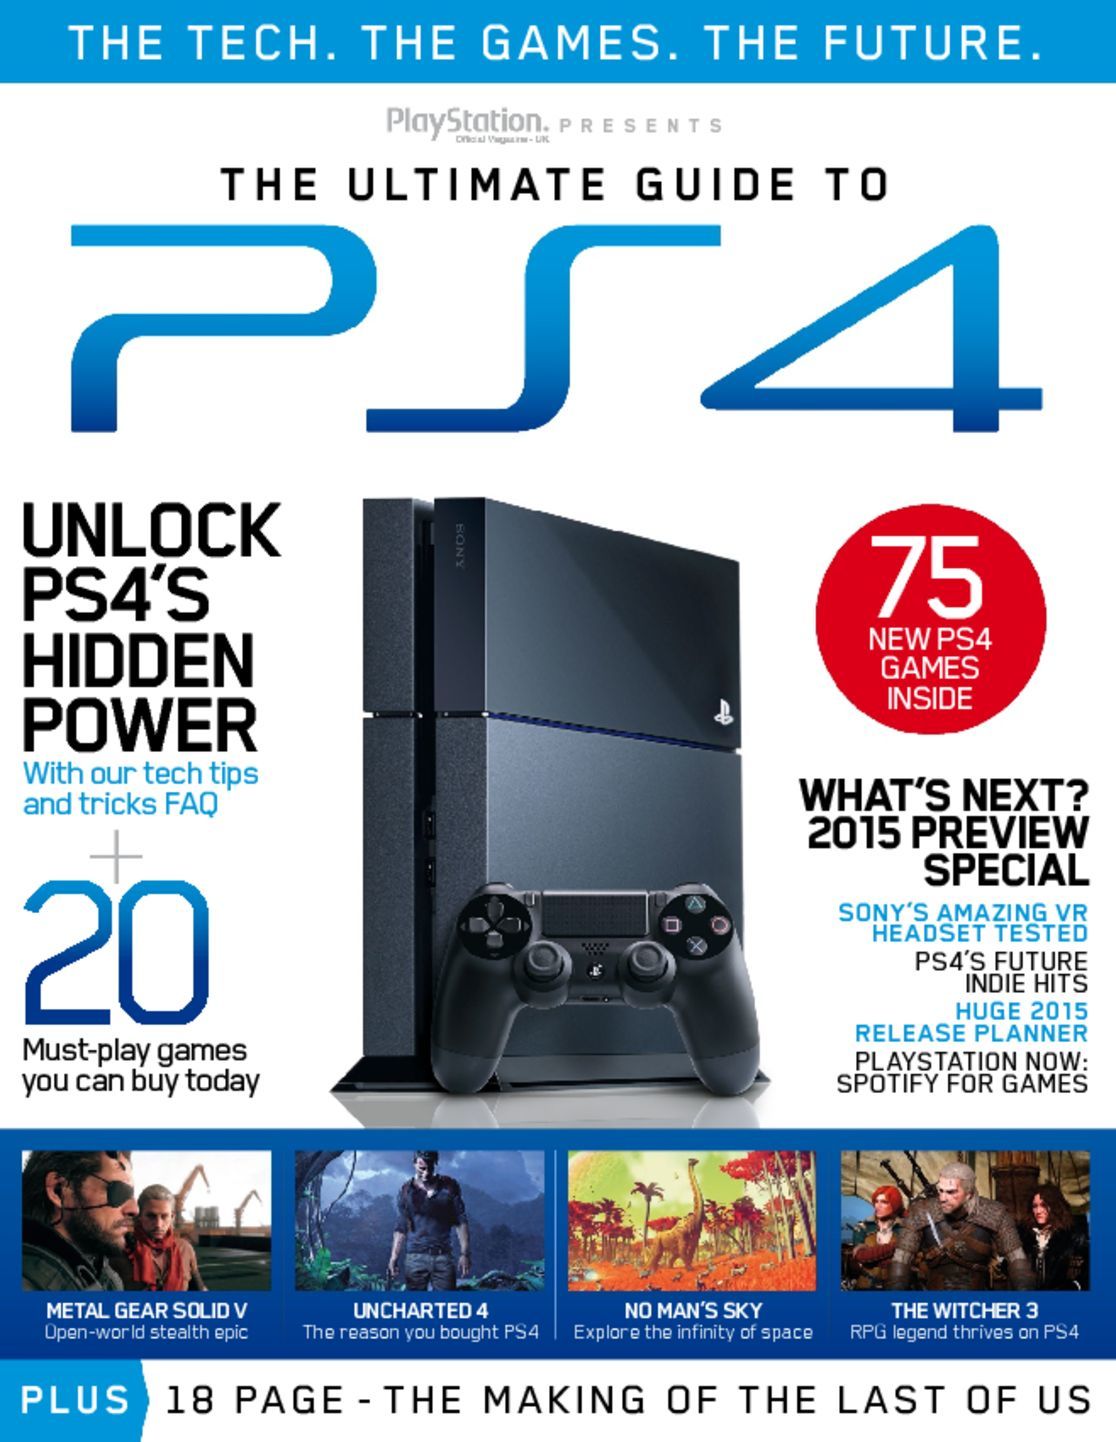 The Ultimate Guide to PS4 (Digital)